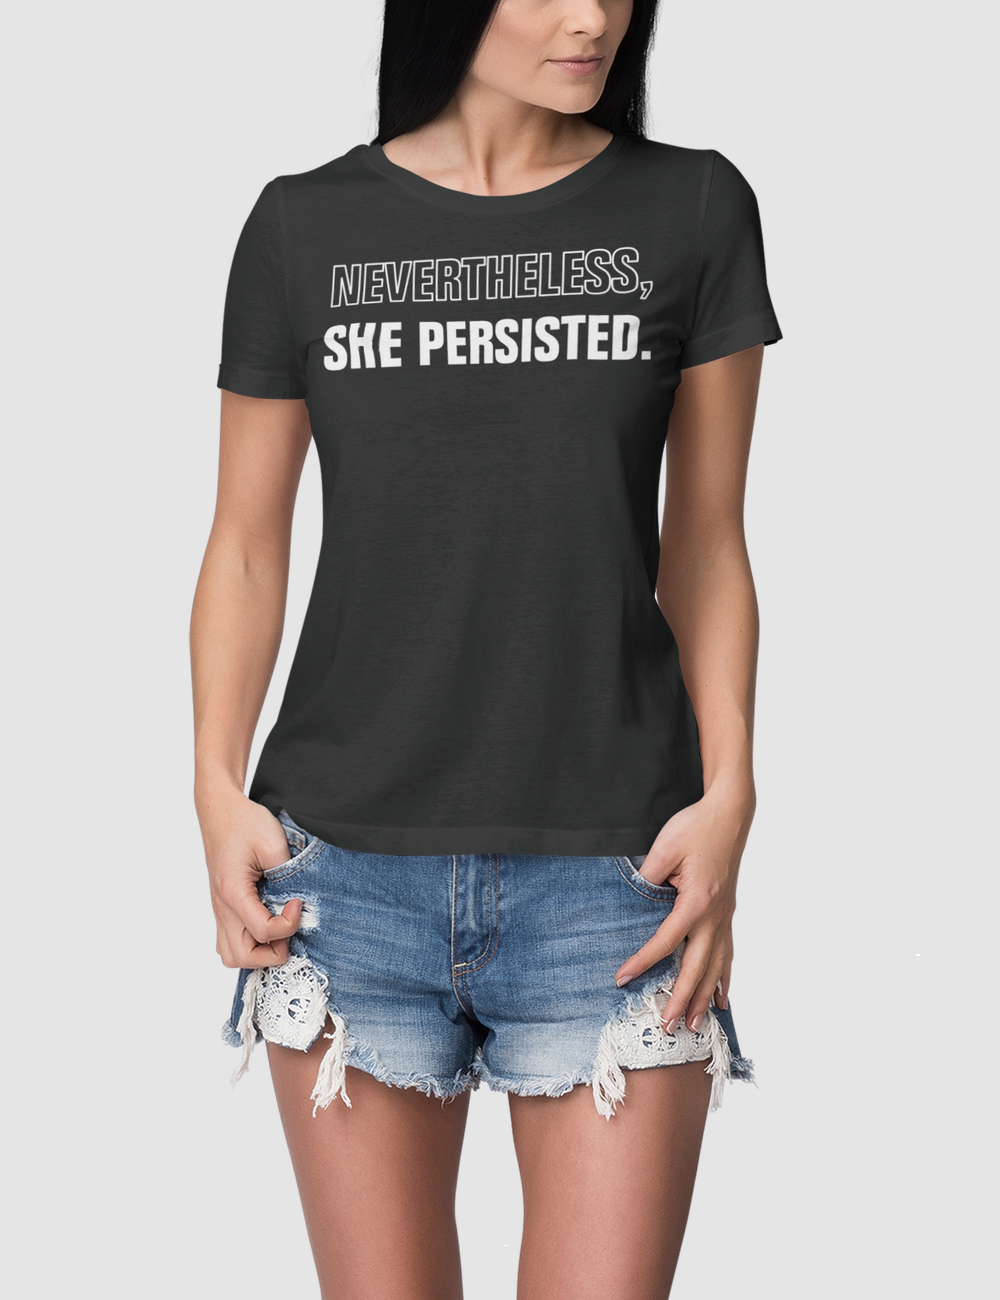 Nevertheless She Persisted | Women's Fitted T-Shirt OniTakai